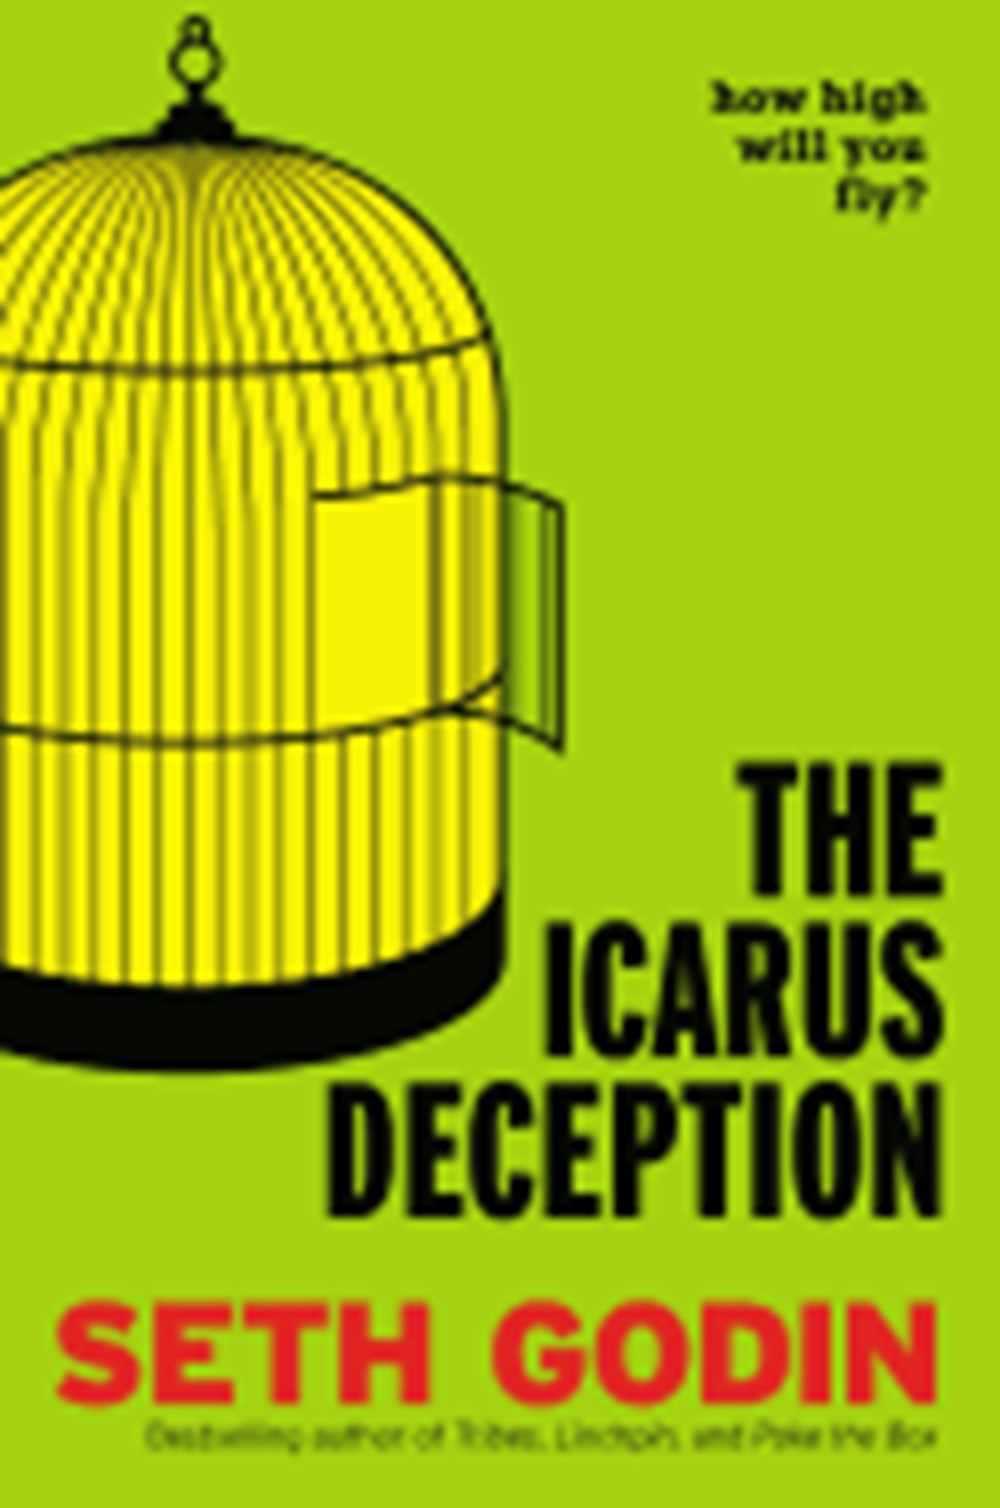 Icarus Deception How High Will You Fly?